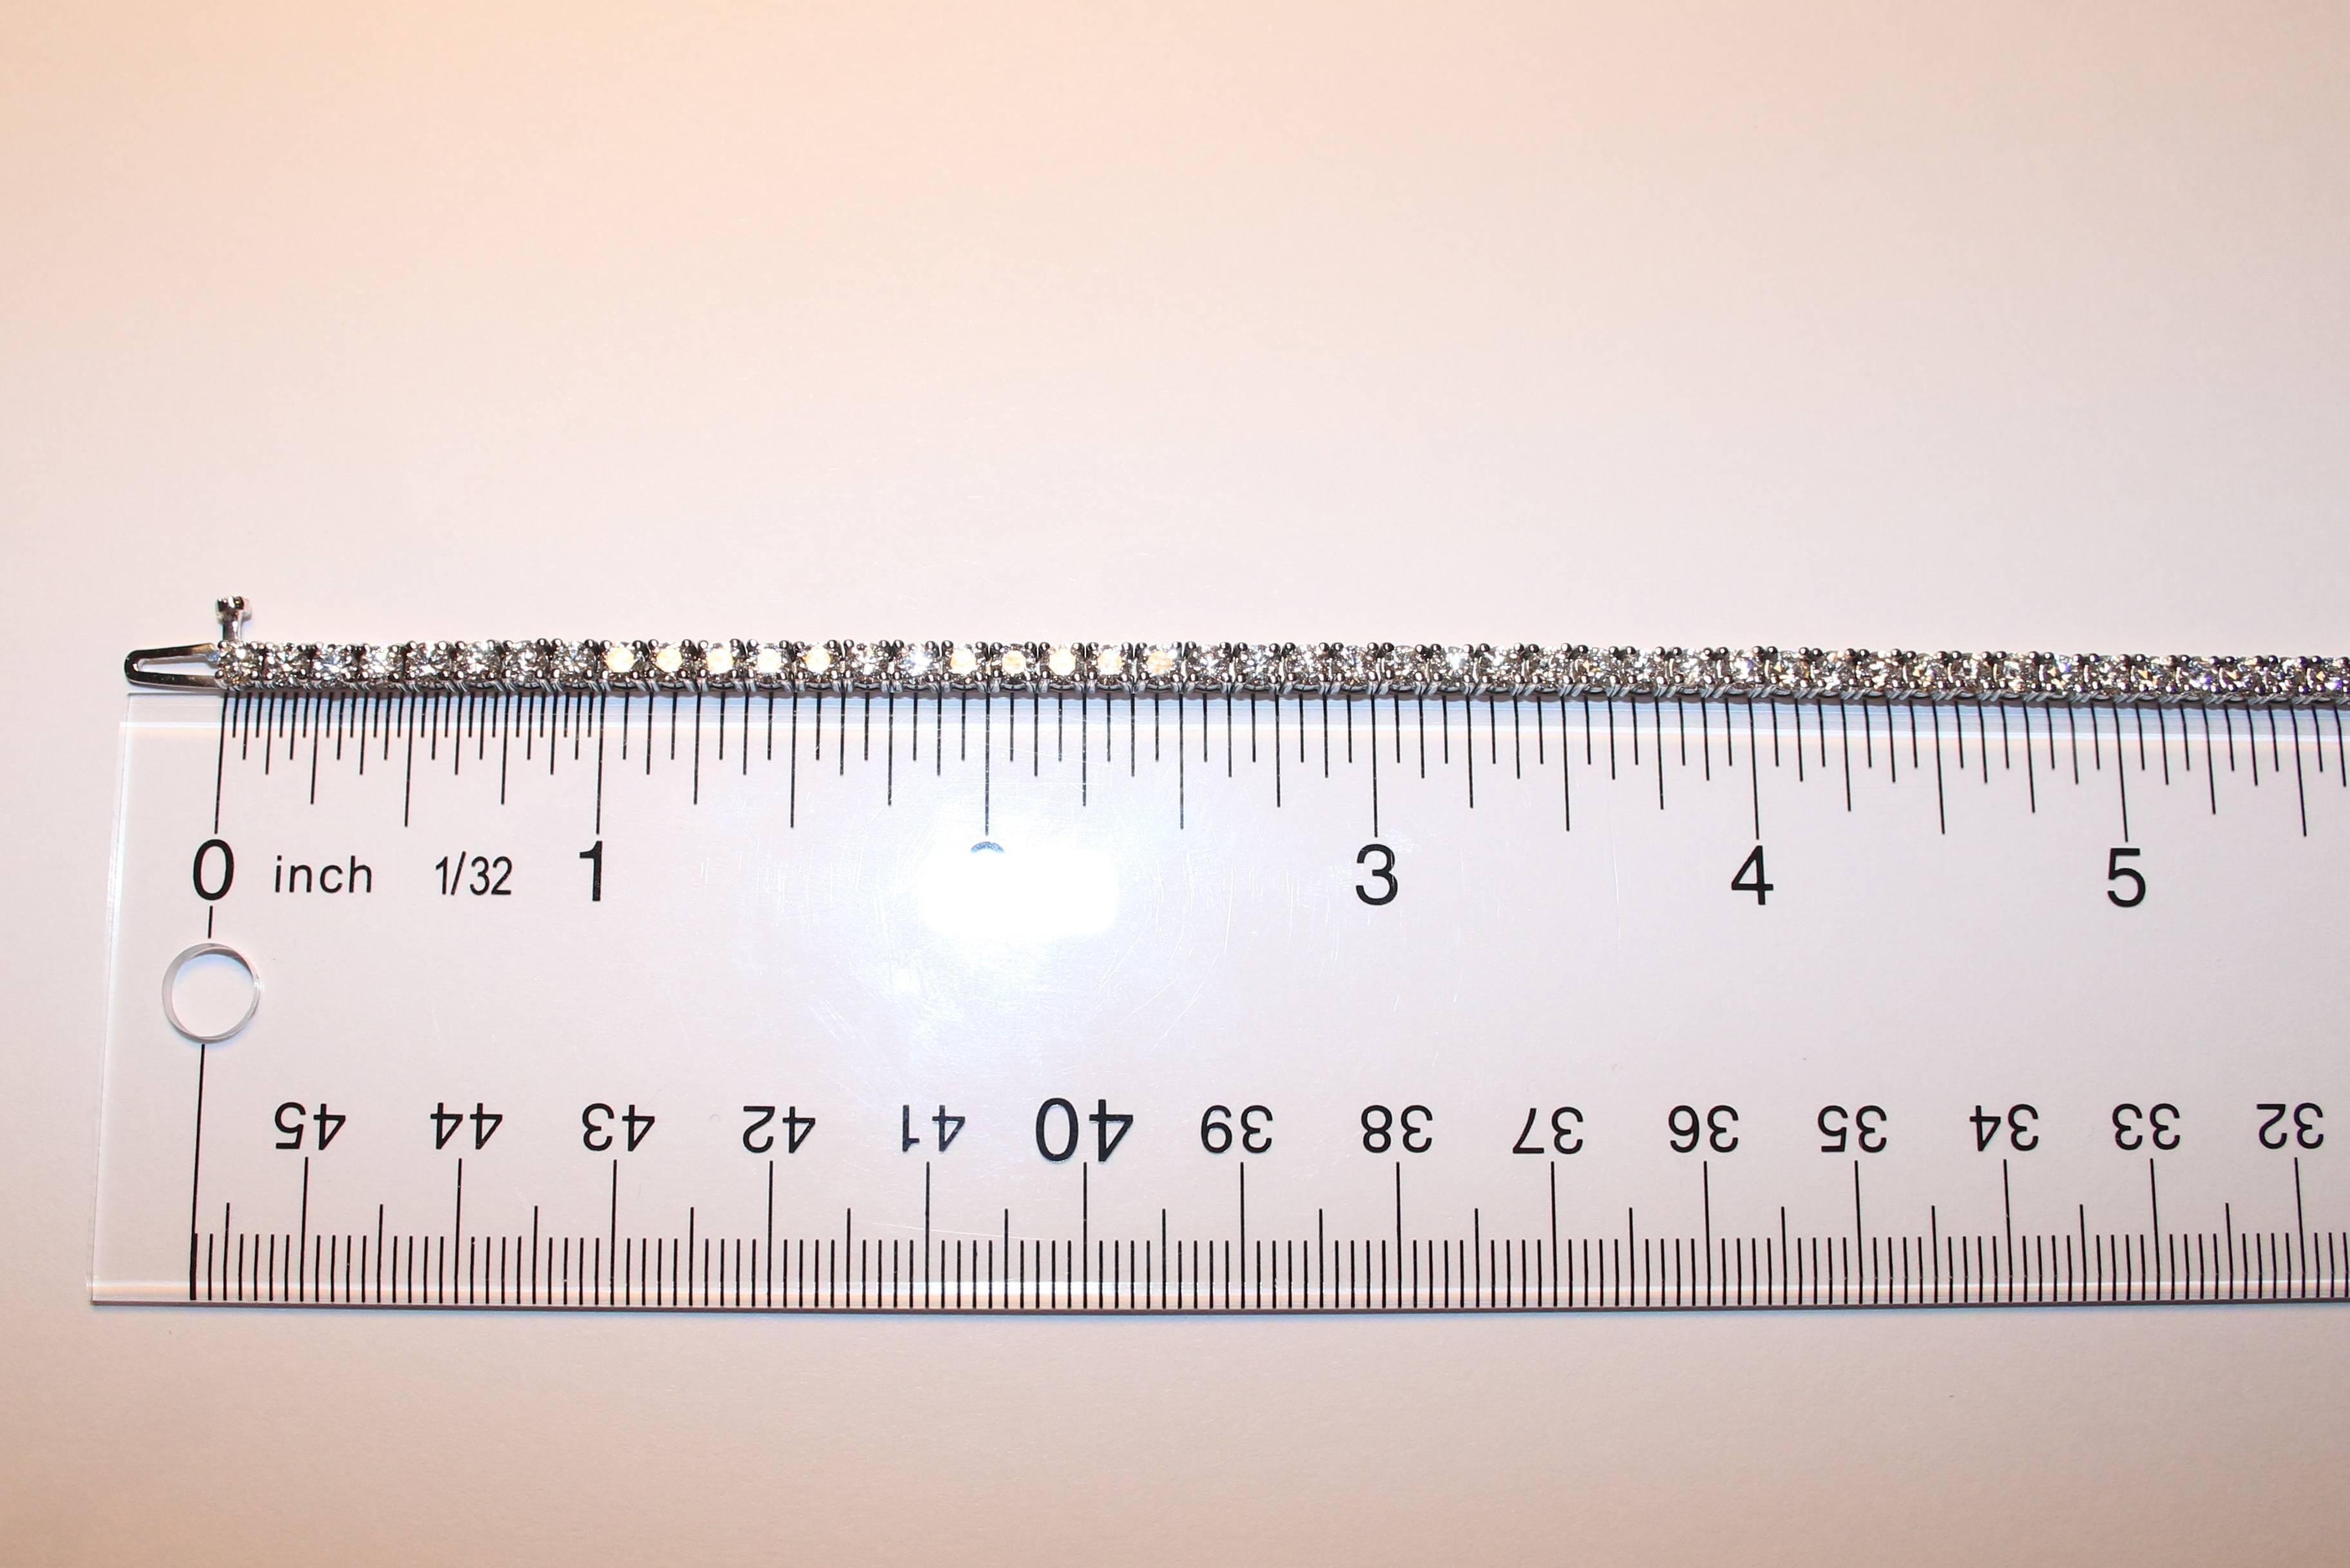 7.48 inches on a ruler